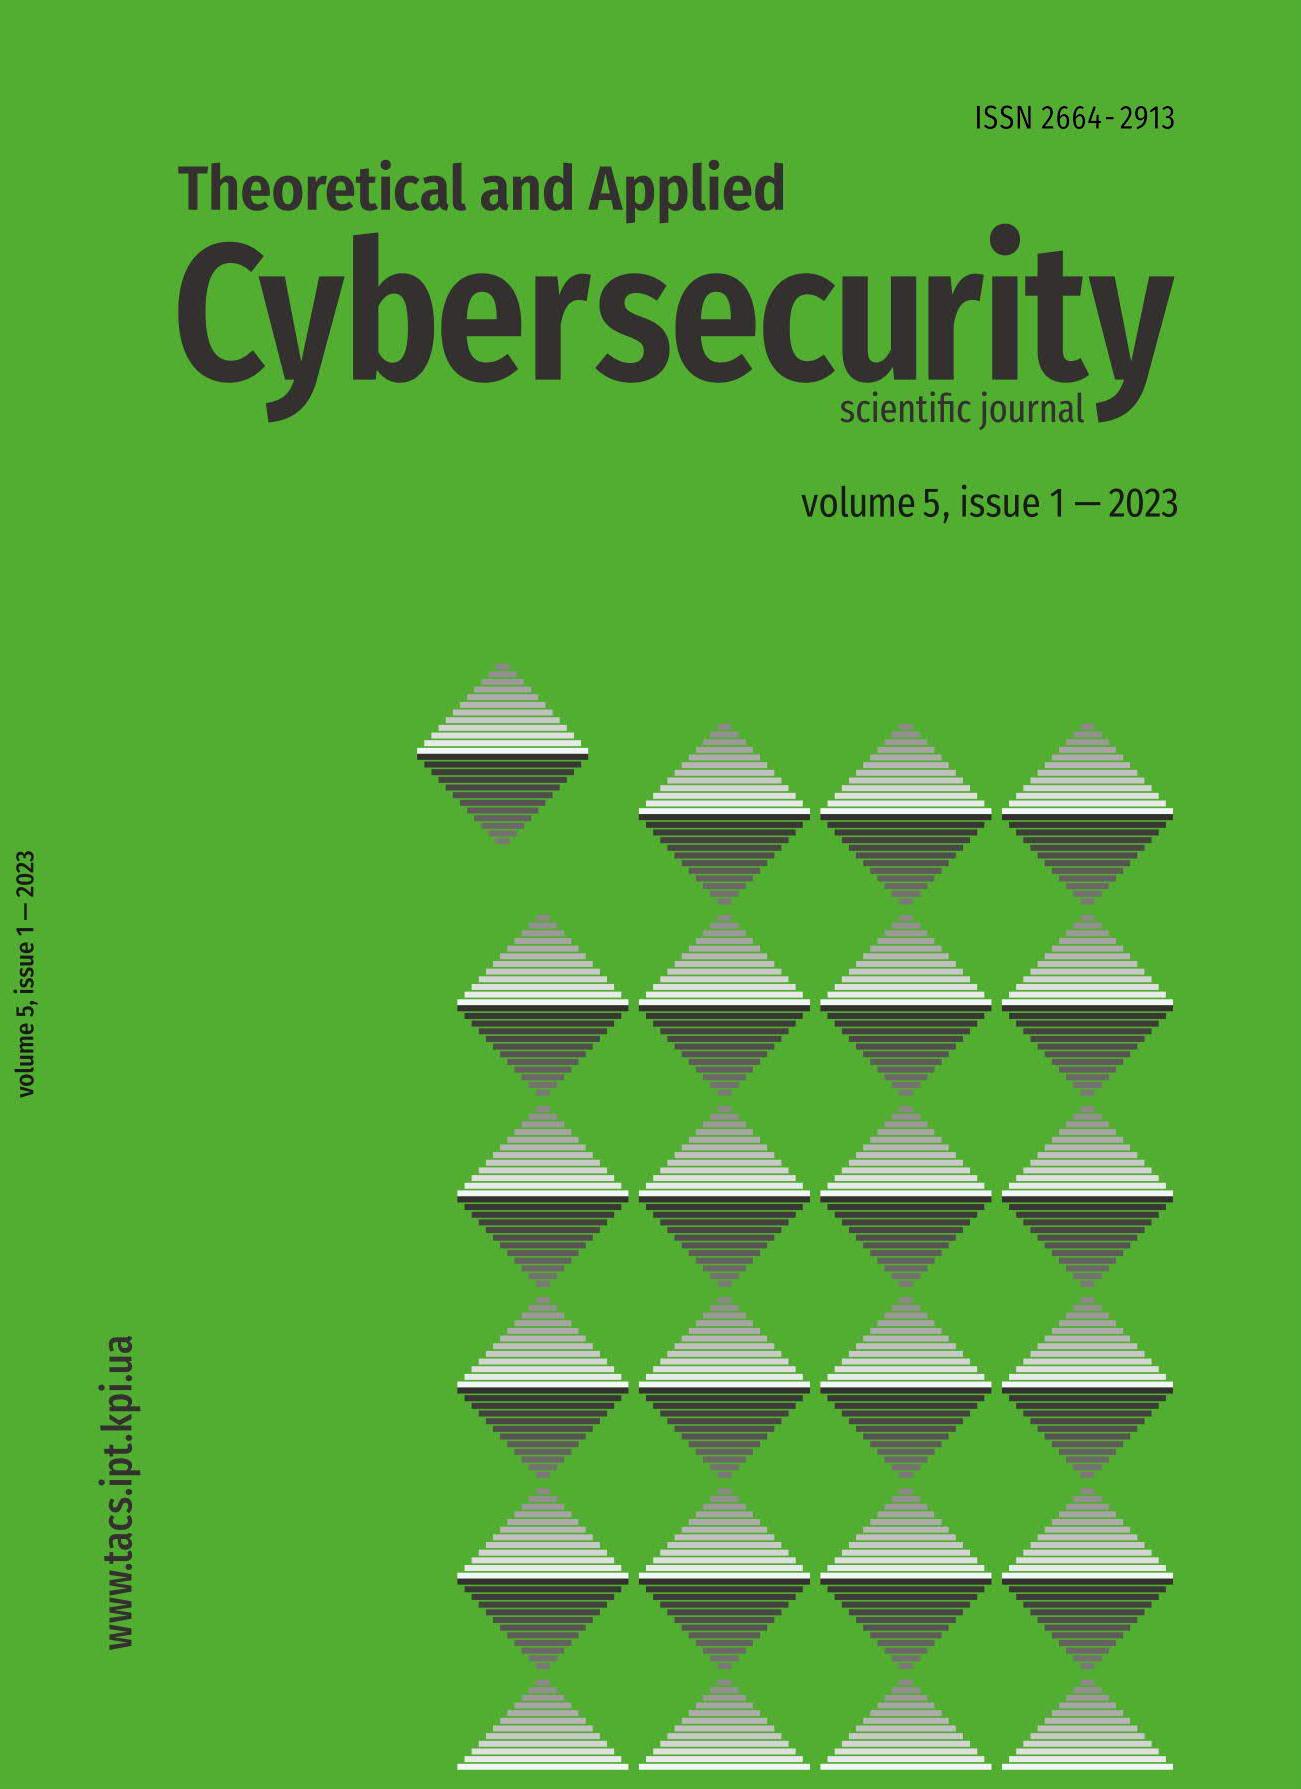 					View Vol. 5 No. 1 (2023): Theoretical and Applied Cyber Security
				